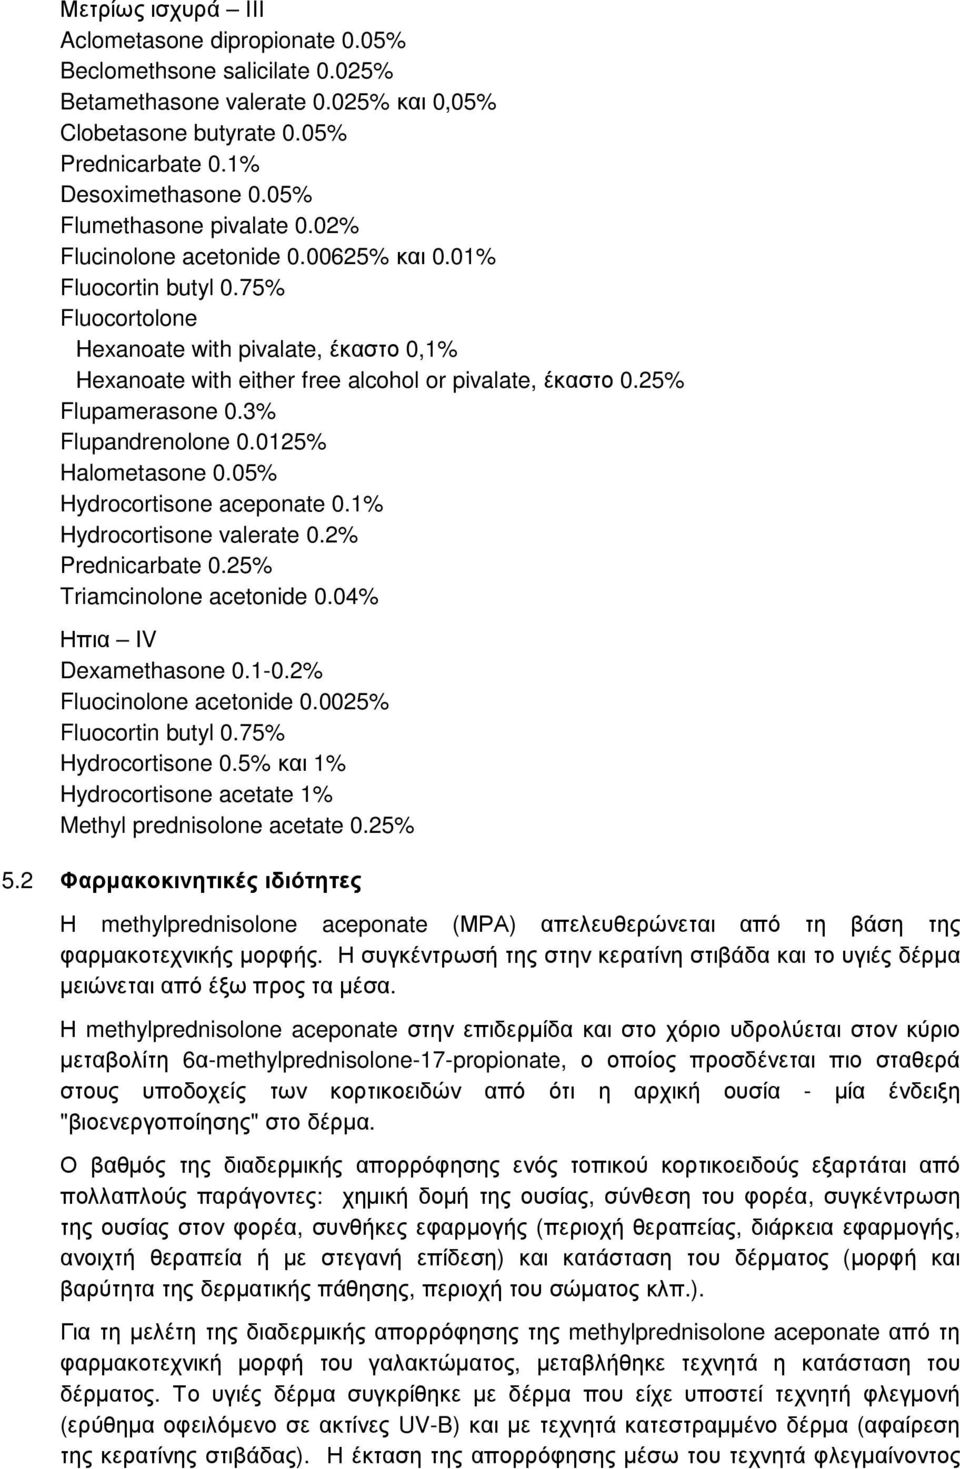 75% Fluocortolone Hexanoate with pivalate, έκαστο 0,1% Hexanoate with either free alcohol or pivalate, έκαστο 0.25% Flupamerasone 0.3% Flupandrenolone 0.0125% Halometasone 0.